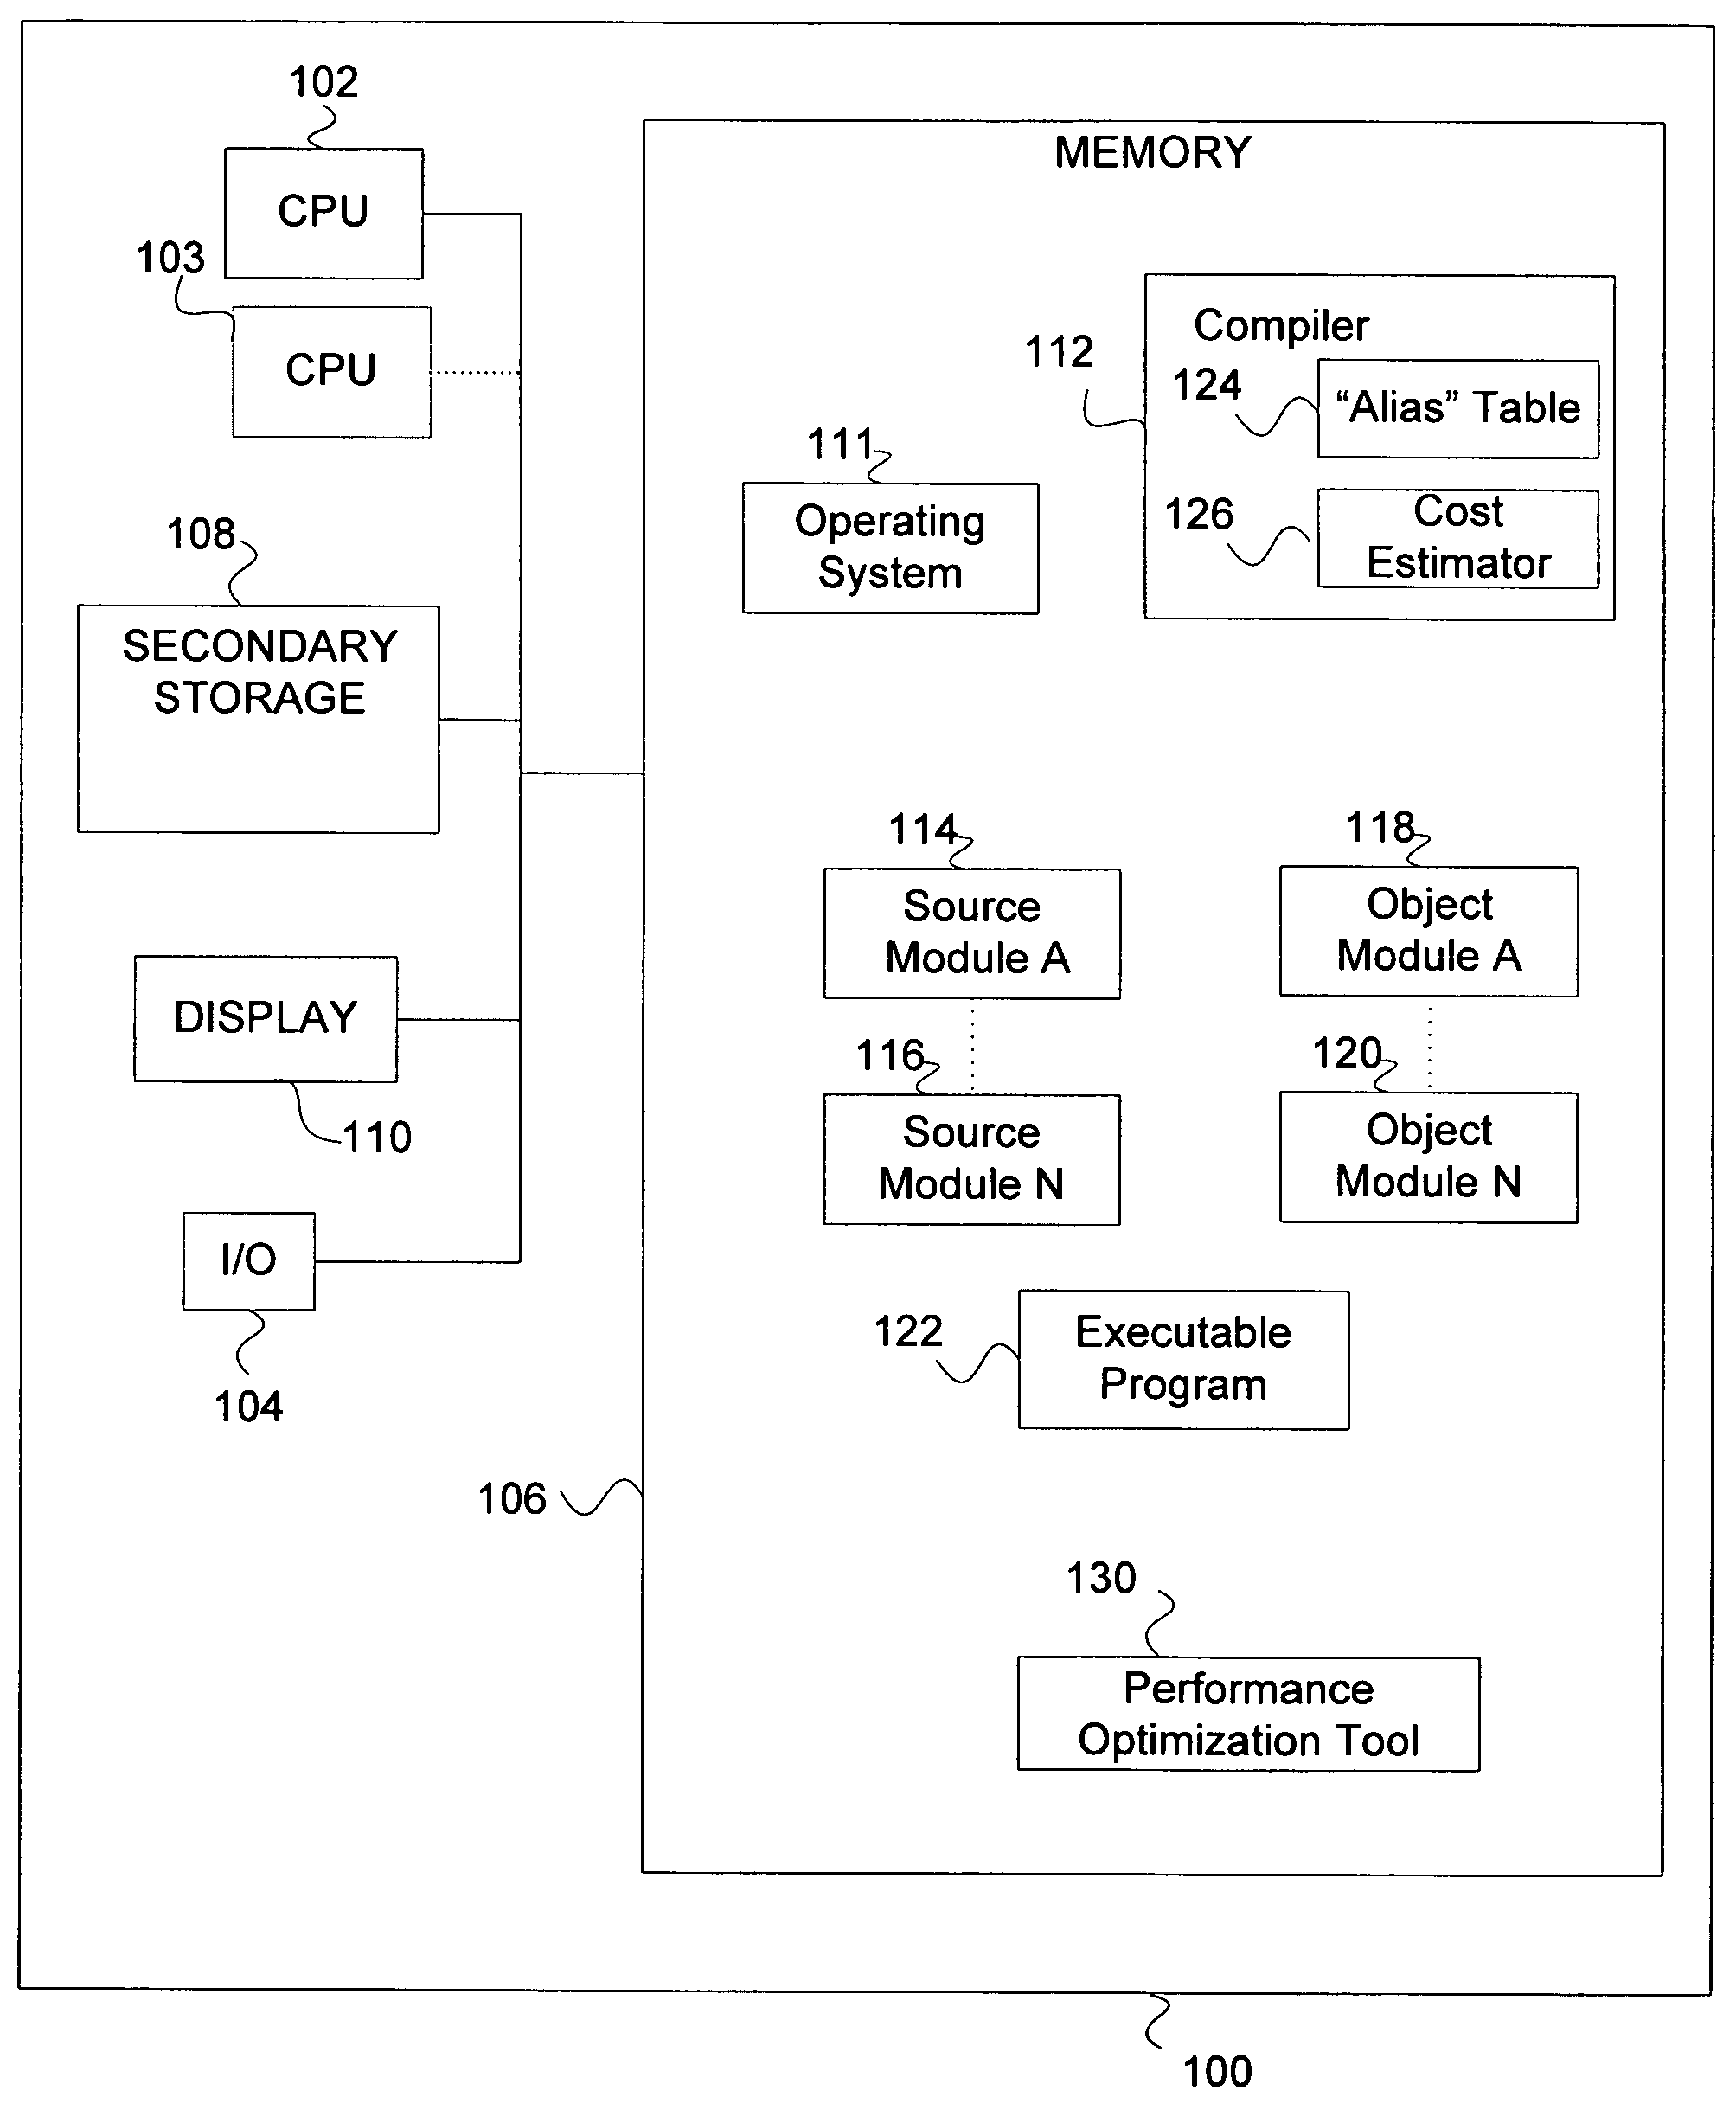 Methods and systems for detecting and avoiding an address dependency between tasks